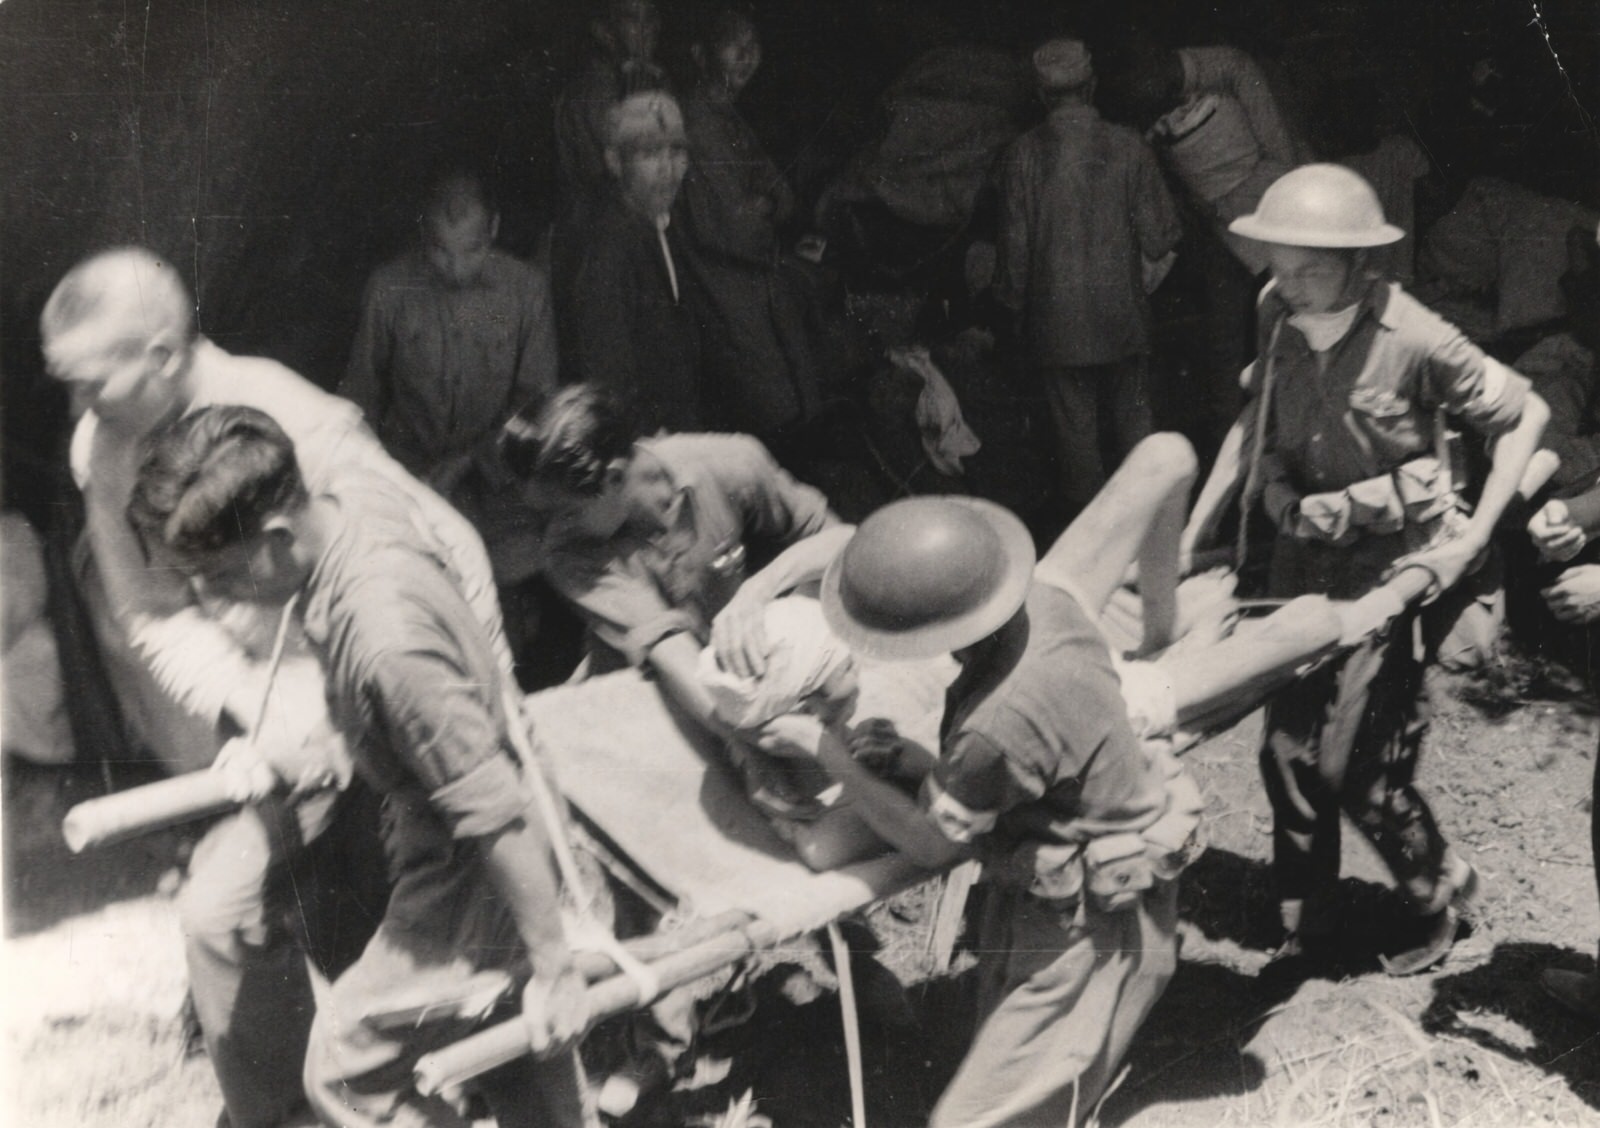 Chinese Red Cross Medical Corps ambulance units at work after a Japanese air-raid. These ambulance workers wear steel helmets and about their waists dressing belts presented to them from the American Red Cross, 1937-1940